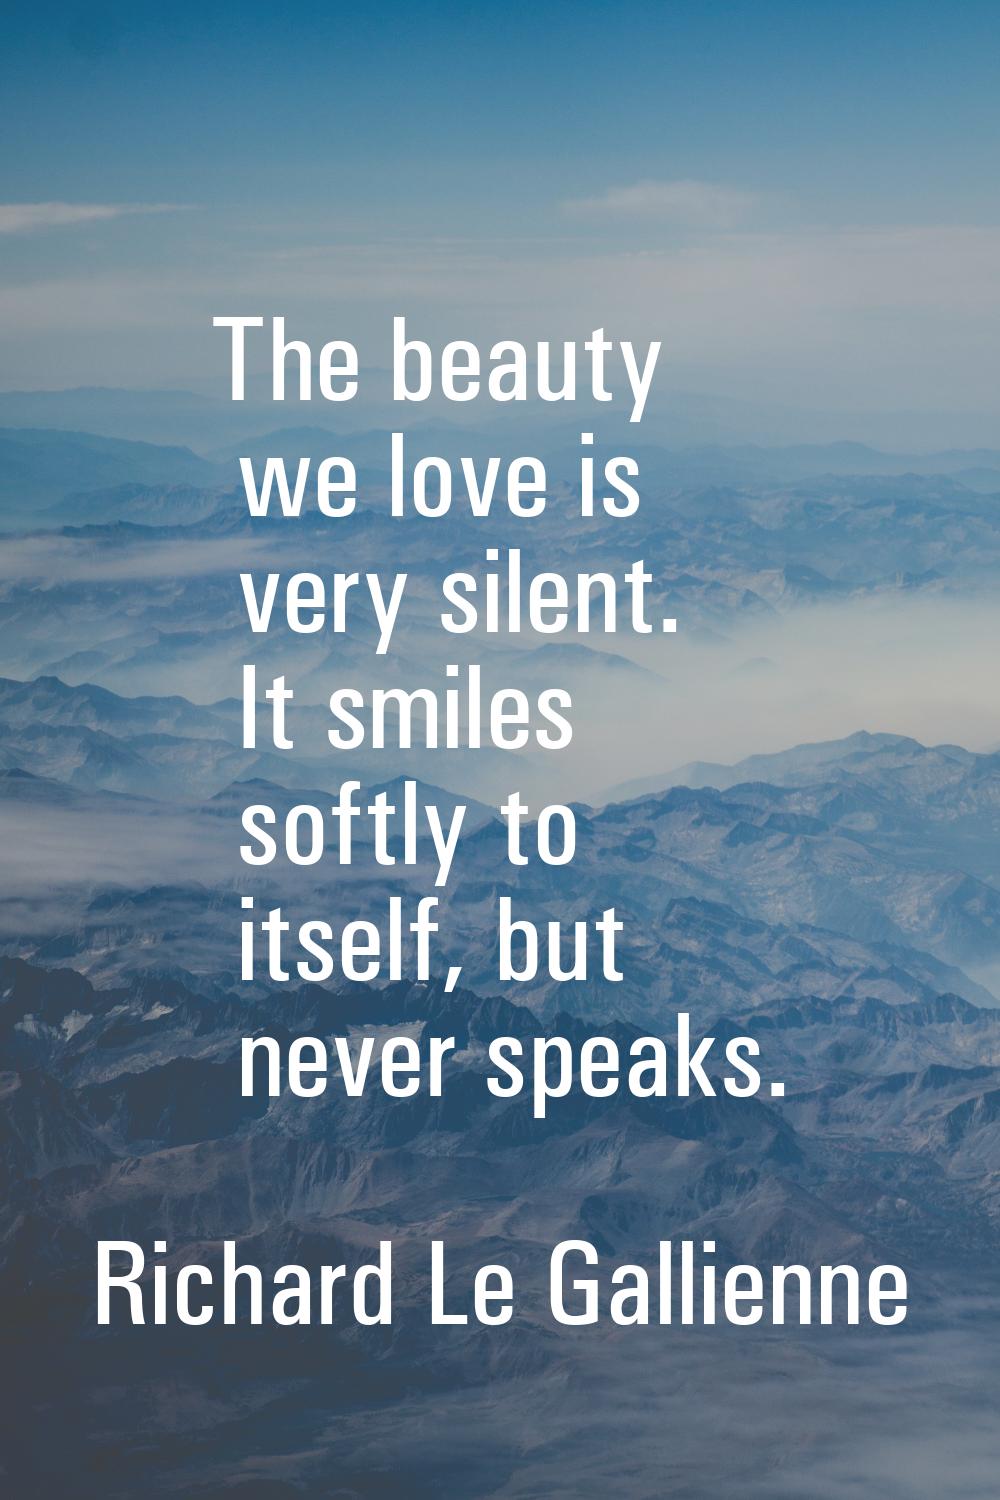 The beauty we love is very silent. It smiles softly to itself, but never speaks.